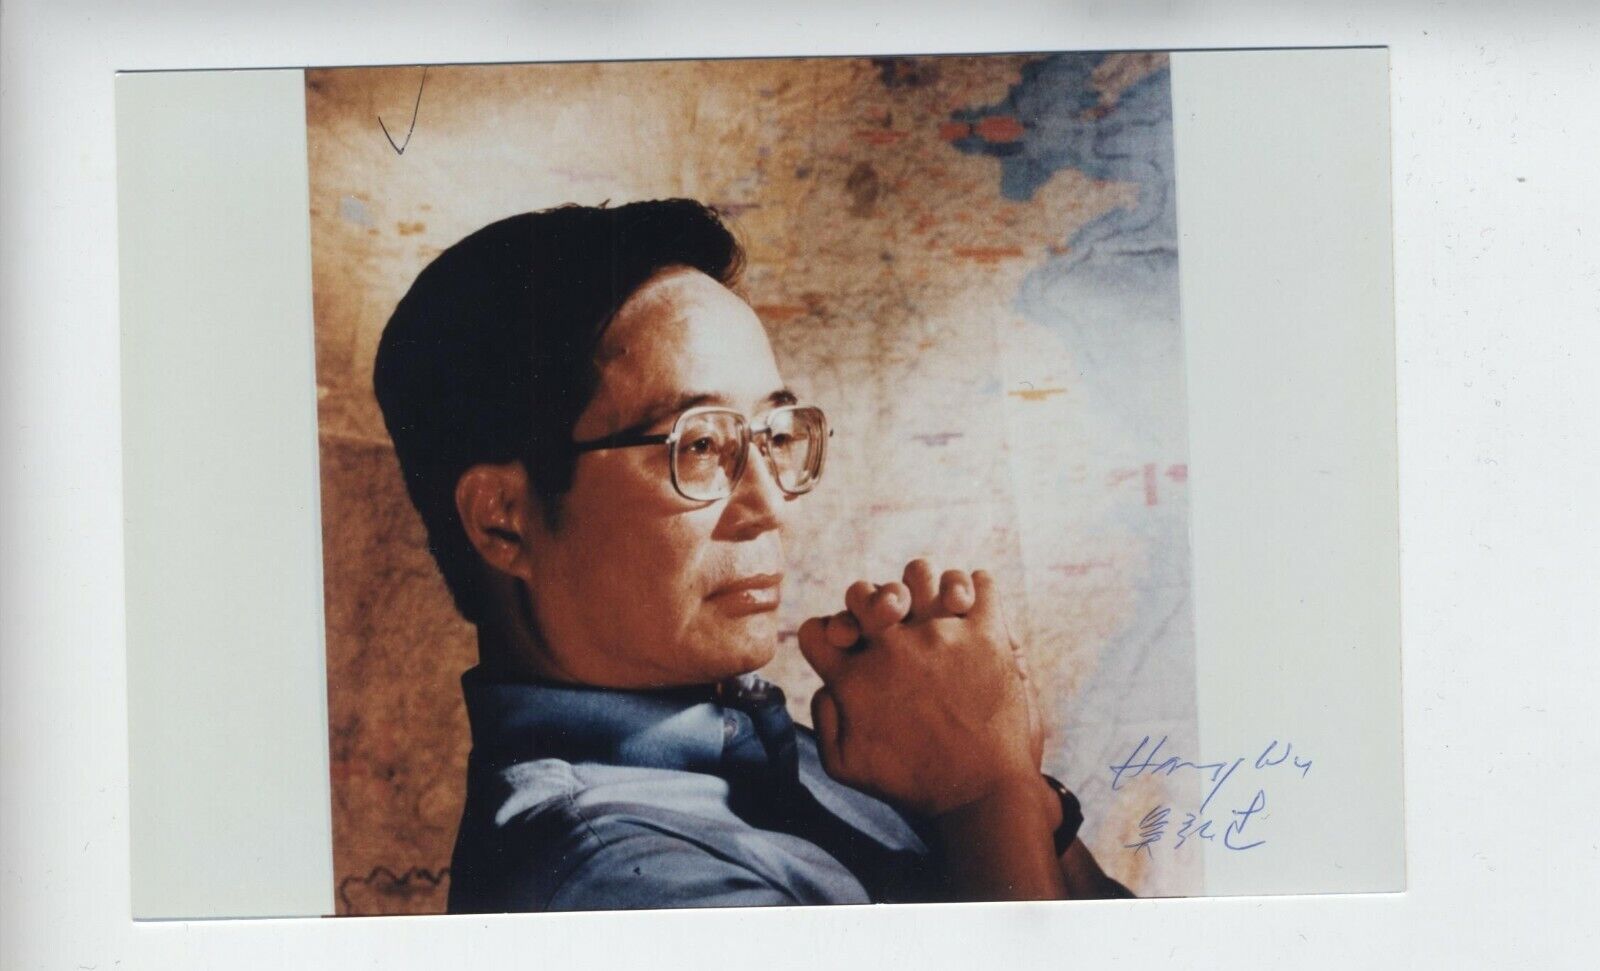 CHINESE AMERICAN HUMAN RIGHTS SIGNED PHOTO ACTIVIST HARRY WU AUTOGRAPH 吴弘达